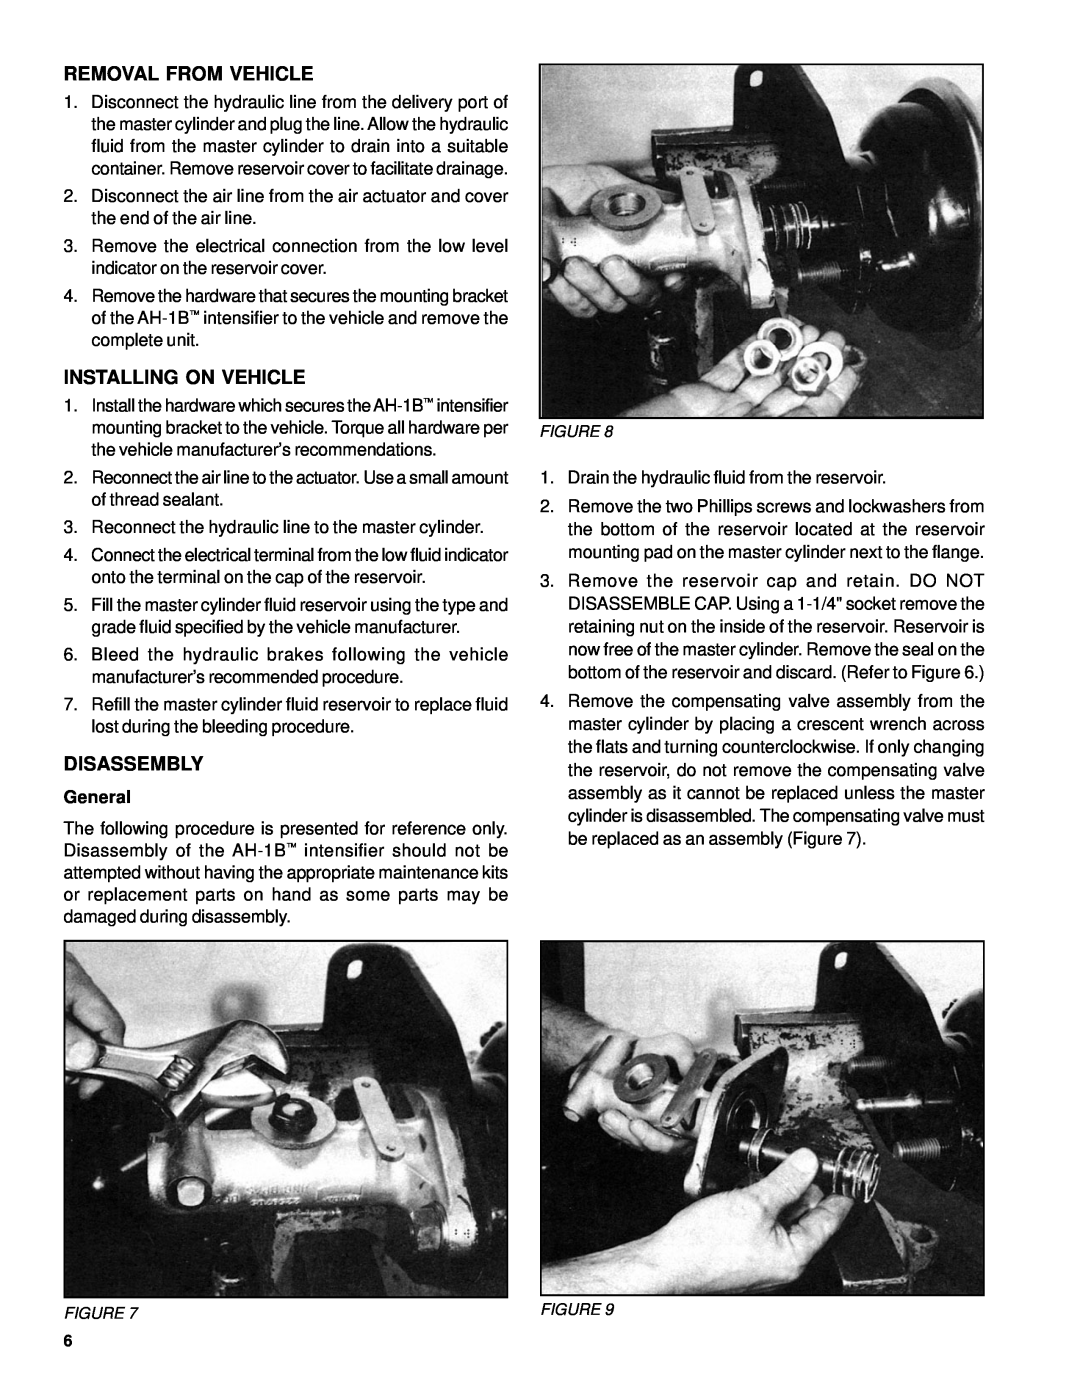 BENDIX SD-11-1326 manual Removal From Vehicle, Installing On Vehicle, Disassembly, General 